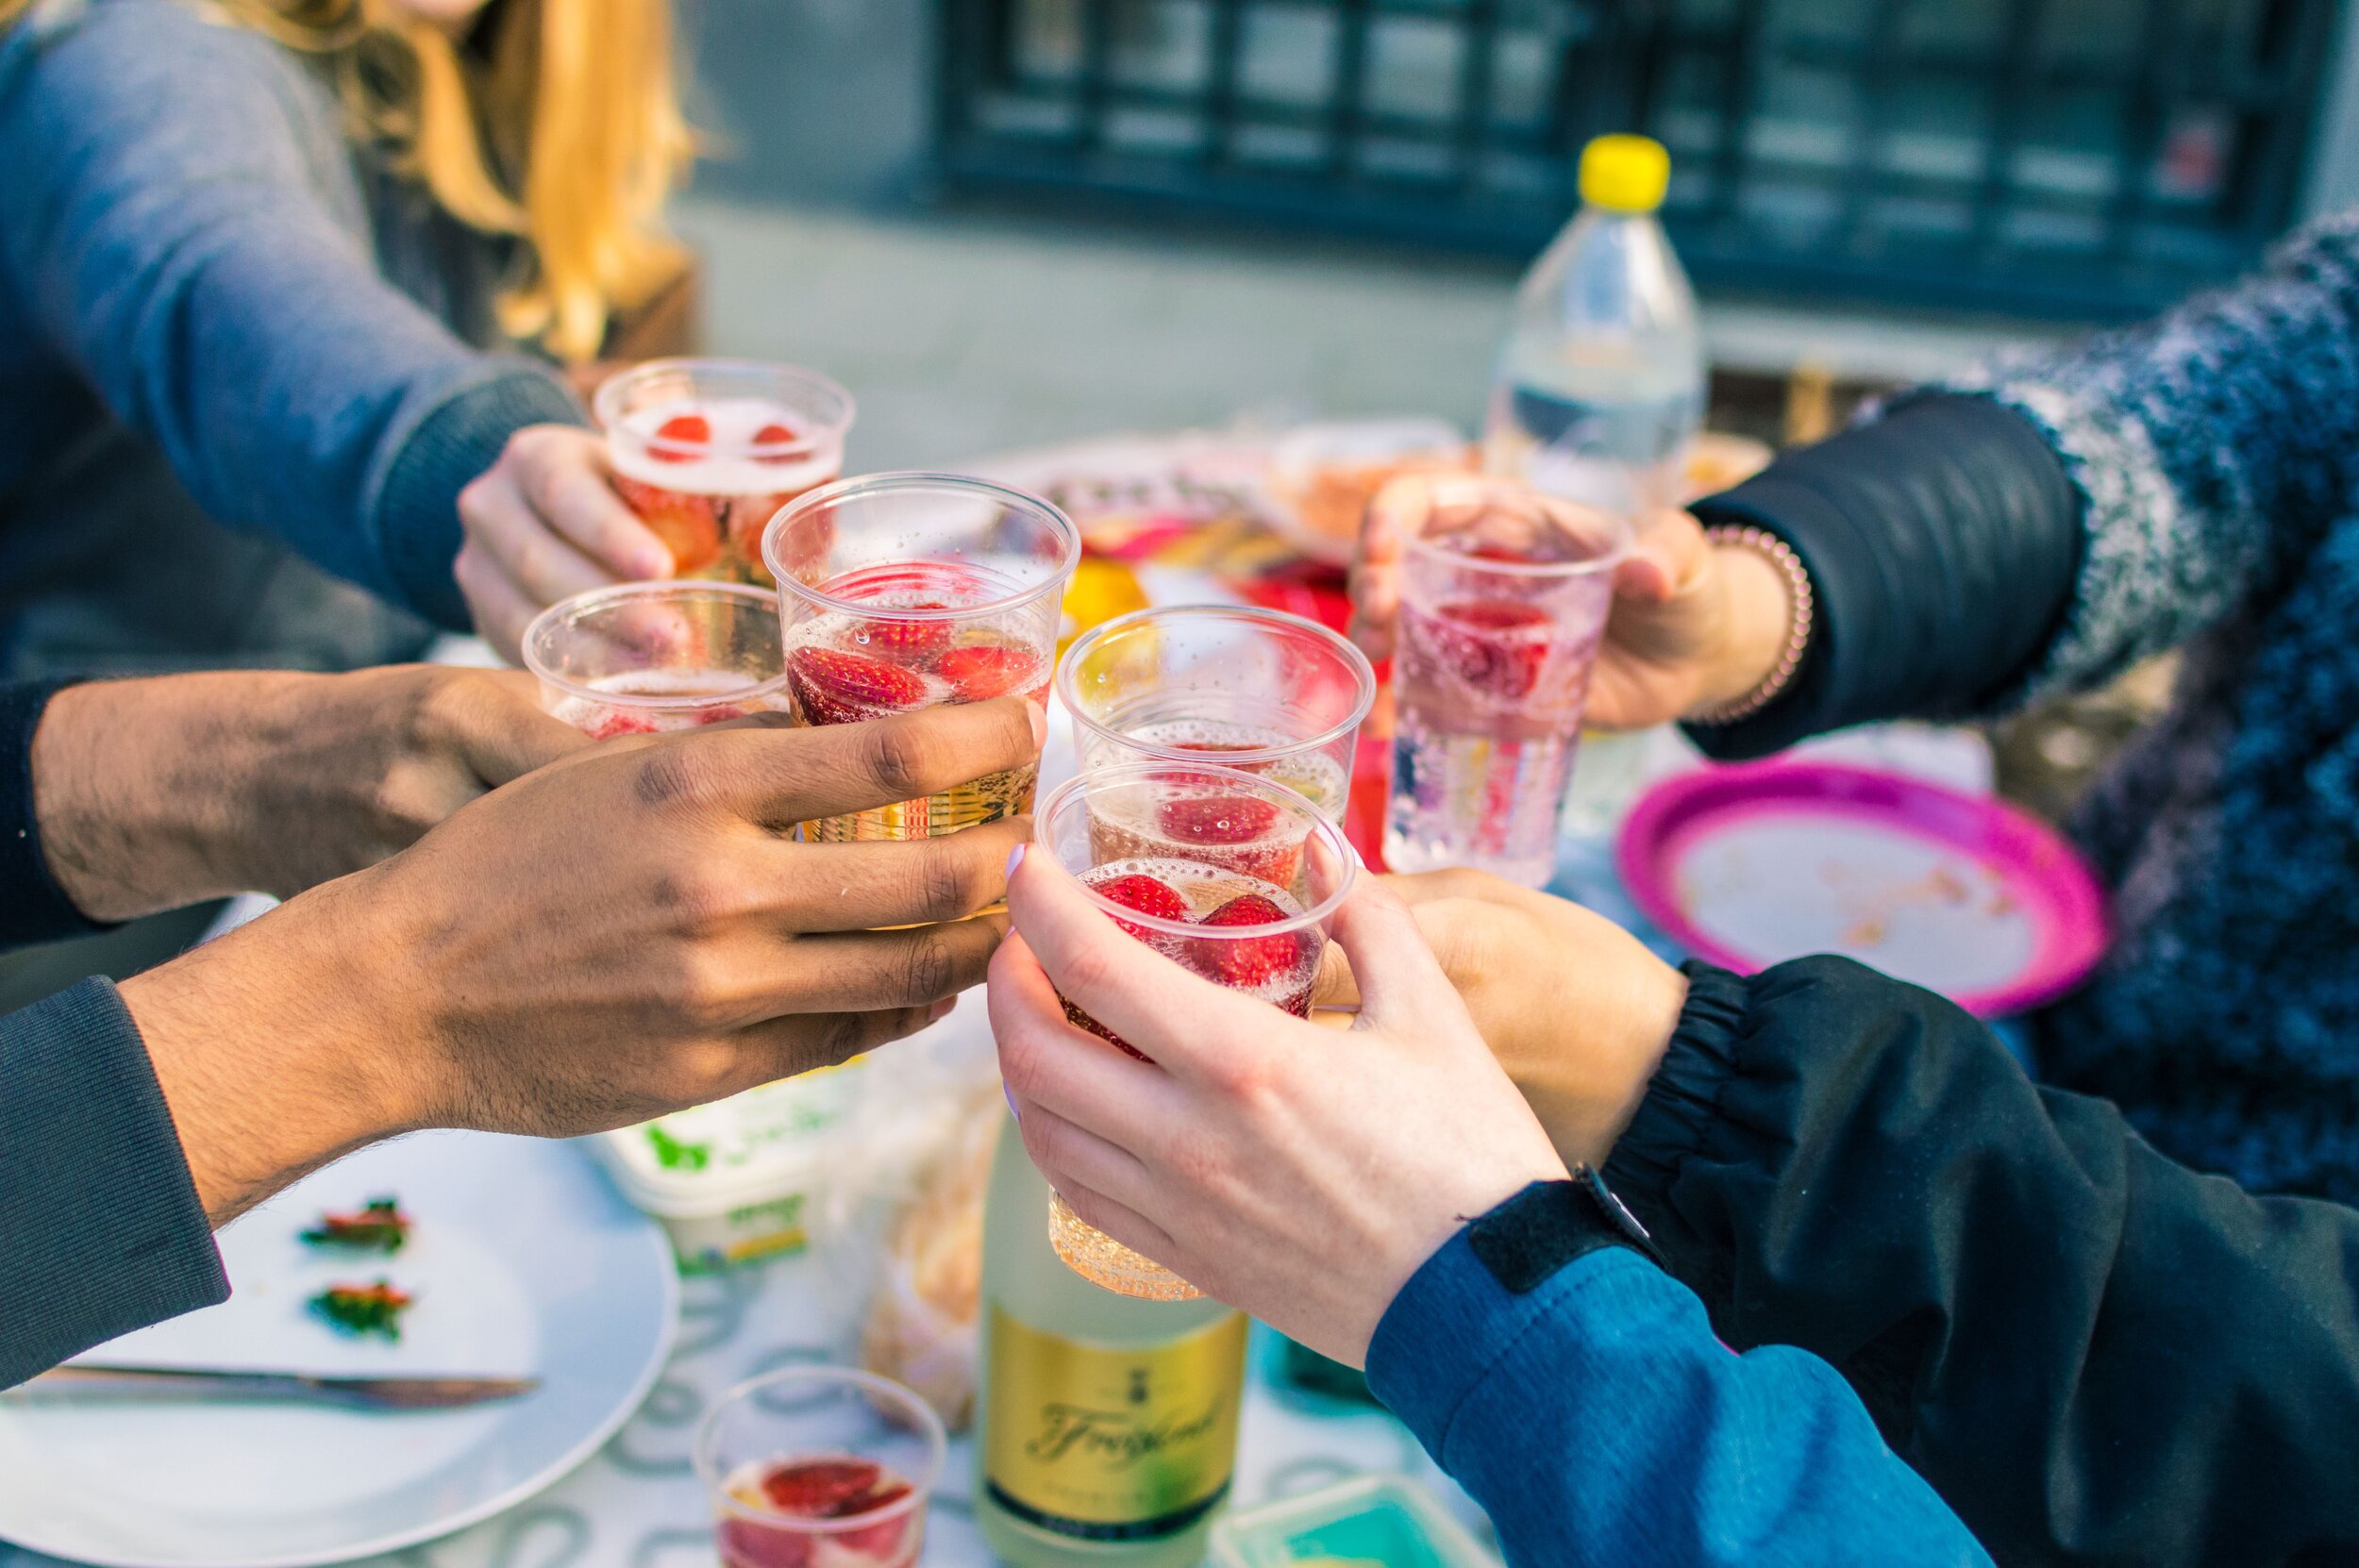 4 Top Summer Health Tips for Social Events